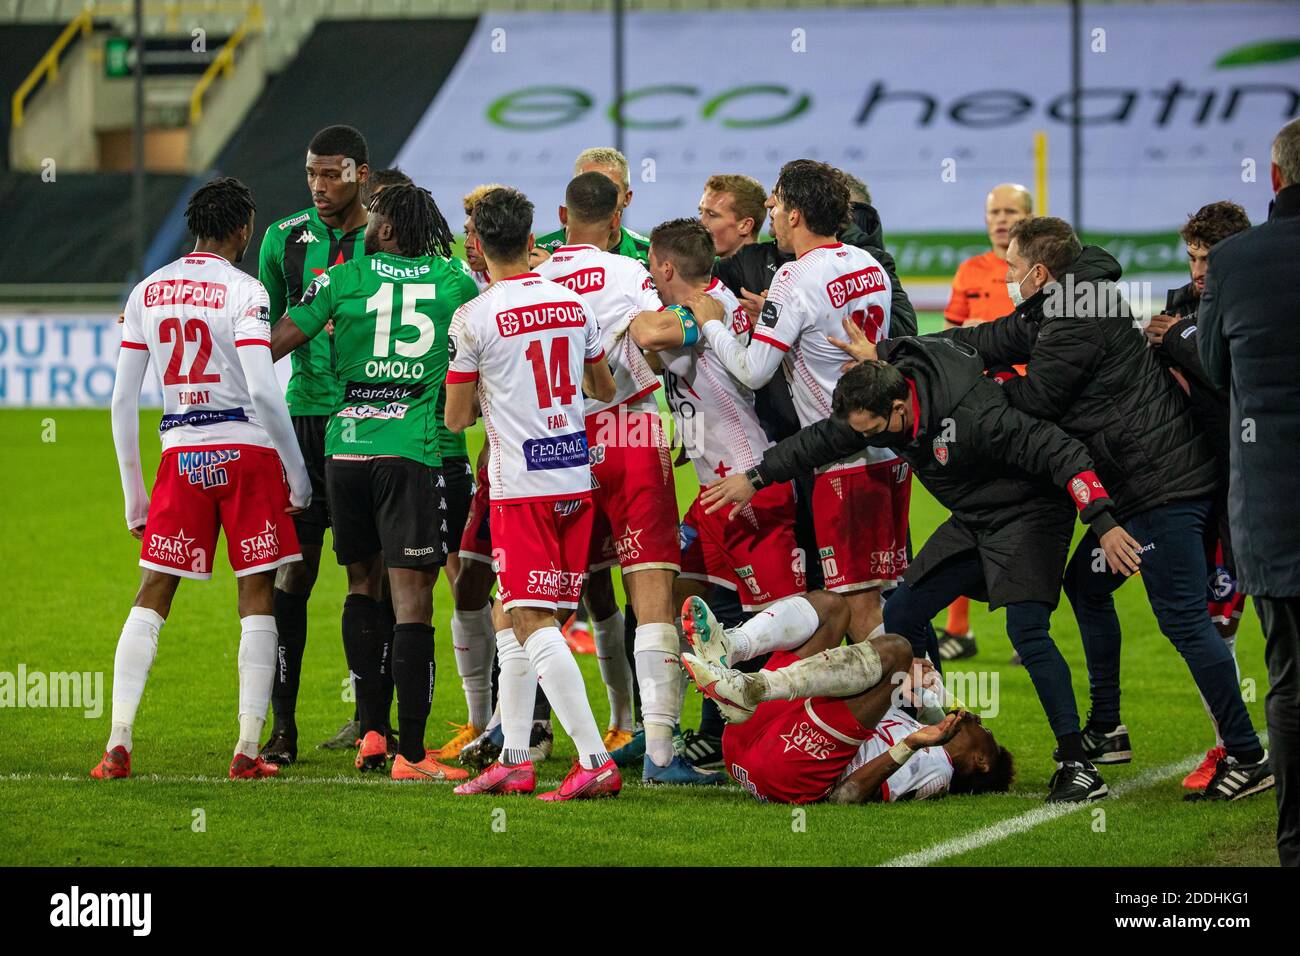 Cercle's players and Mouscron's players fighting during a postponed soccer match between Cercle Brugge KSV and RE Mouscron, Wednesday 25 November 2020 Stock Photo